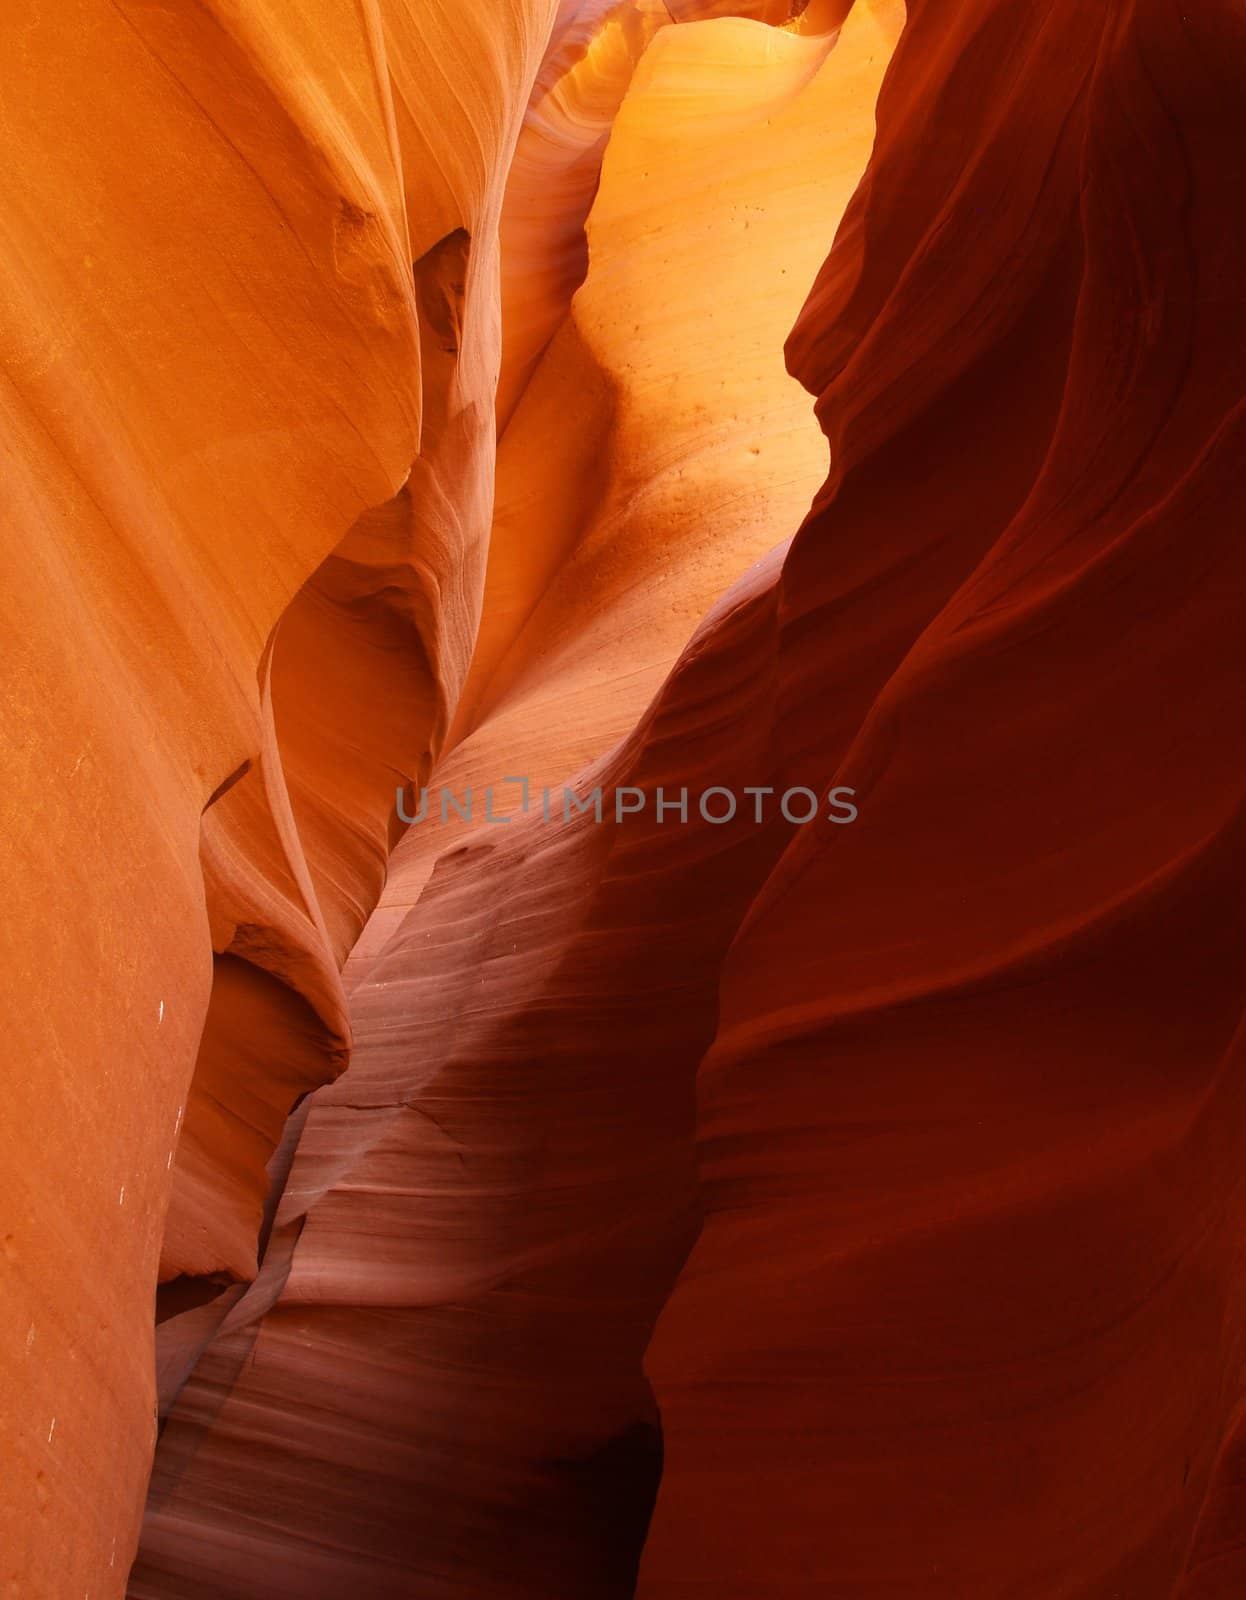 The upper Antelope Slot Canyon near Page by gary718